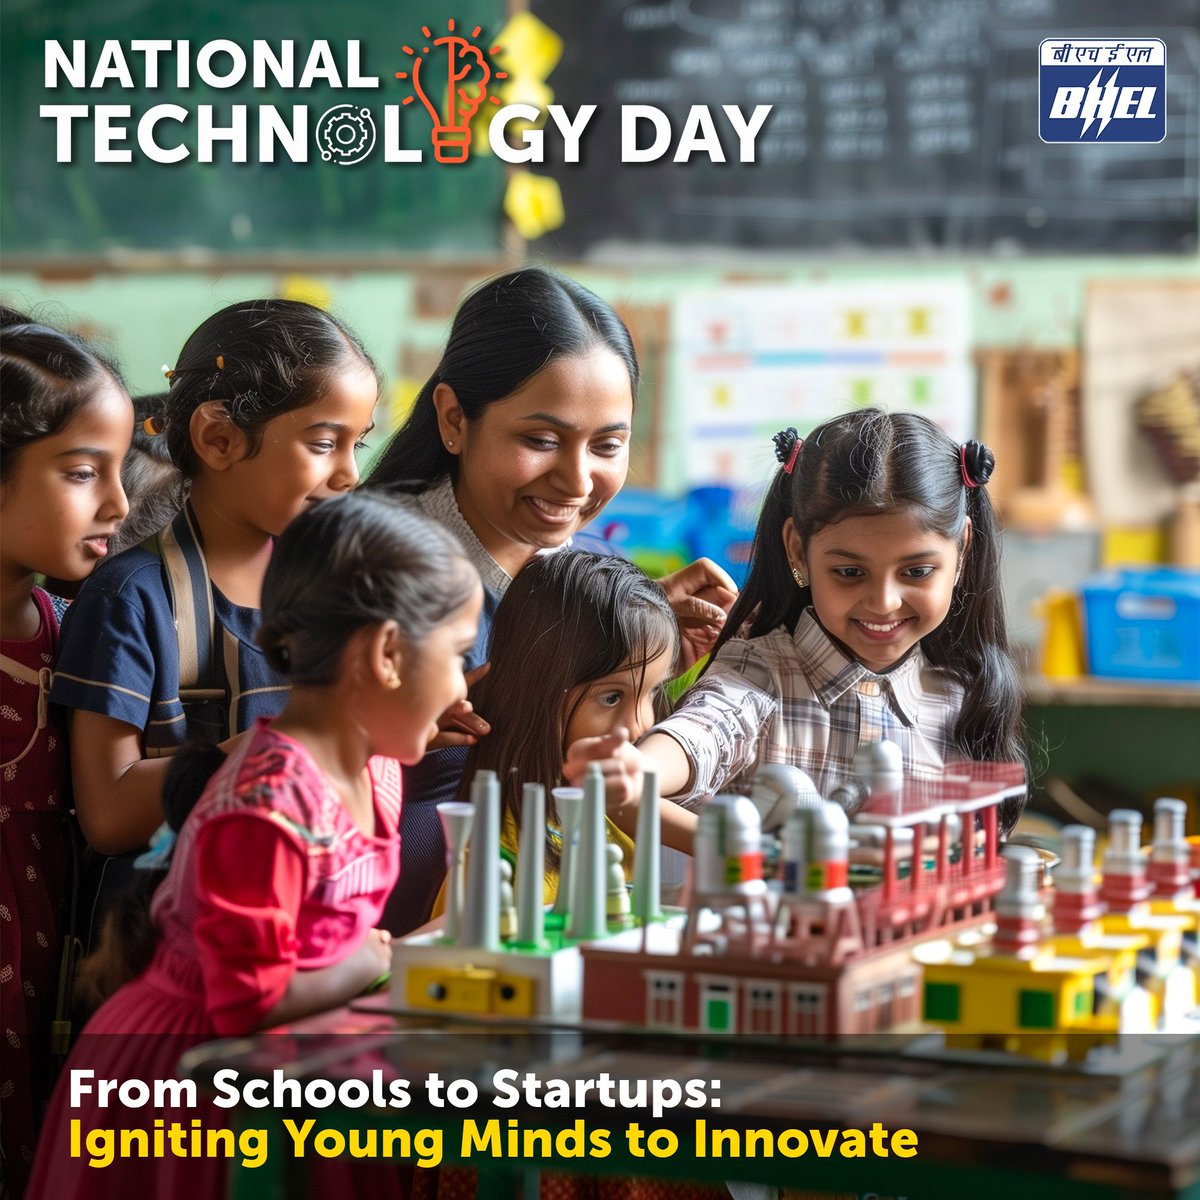 The spark of innovation starts young! This #NationalTechnologyDay, BHEL salutes the ignited minds shaping India's future. Let's empower our children to become the innovators and entrepreneurs of the next generation. #fromschoolstostartups #BHELCares…